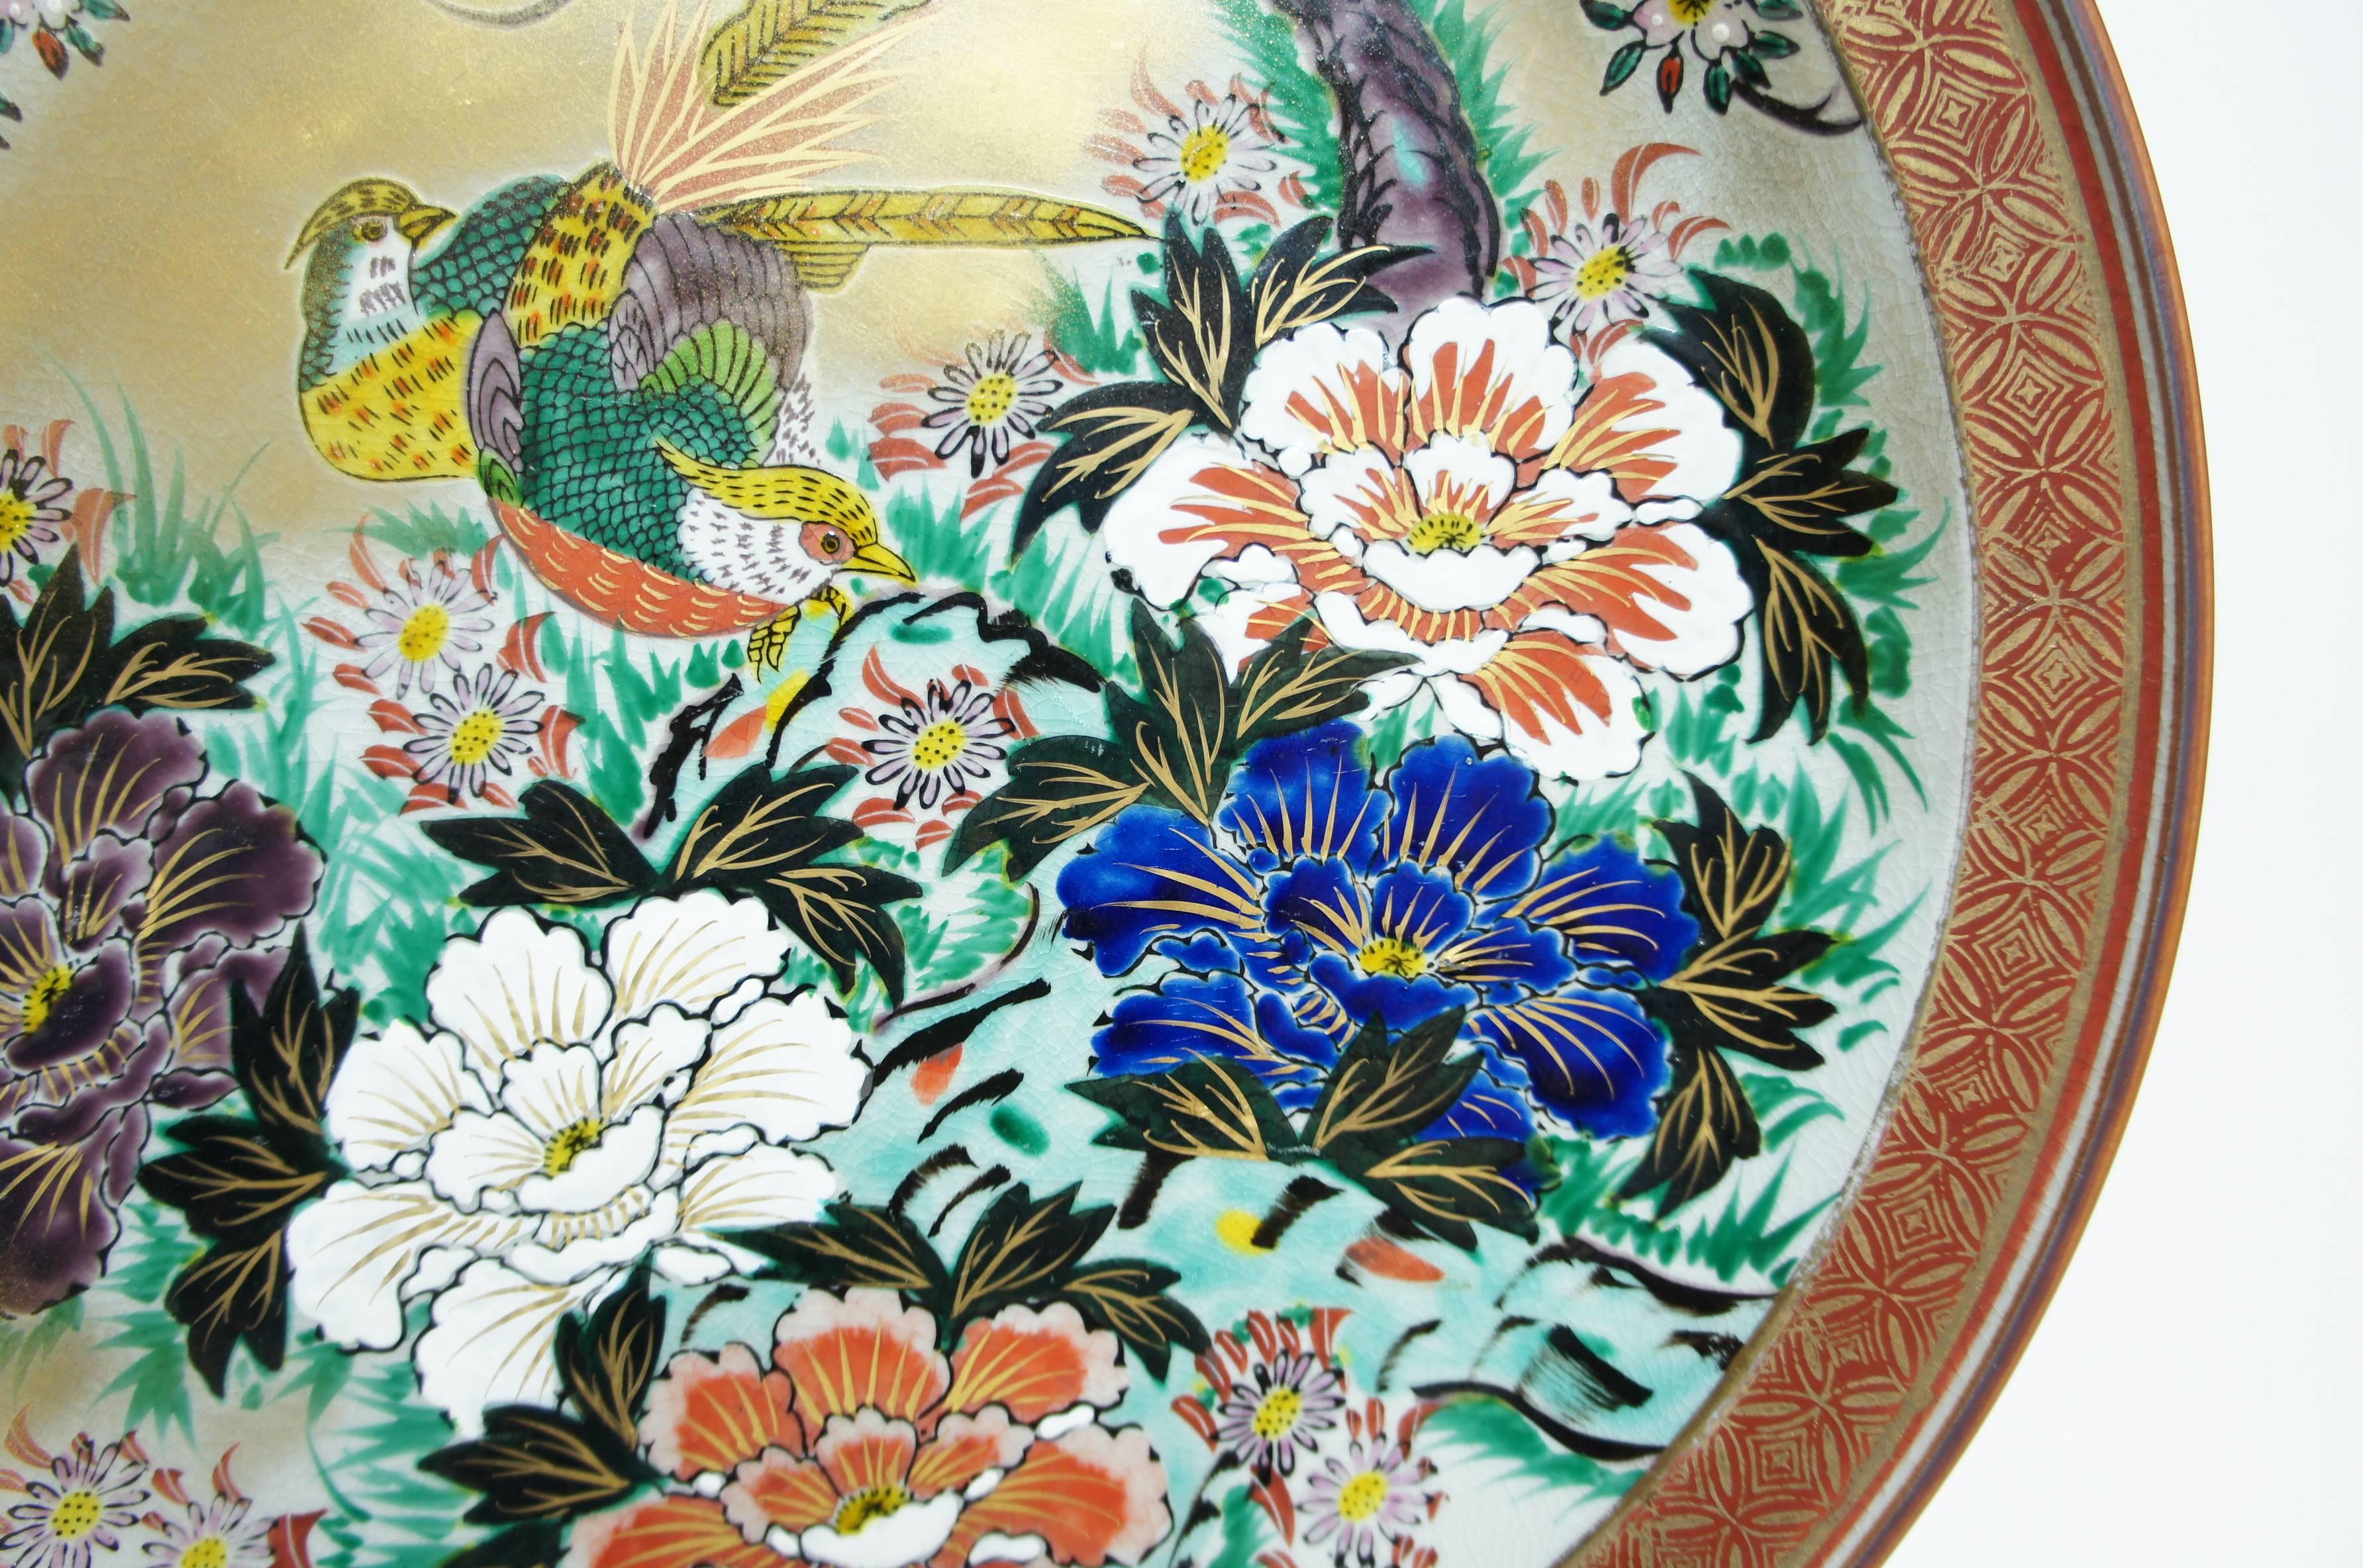 20th Century Japanese Peony and Birds Painting on Porcelain Kutani Large Plate, 1950s For Sale